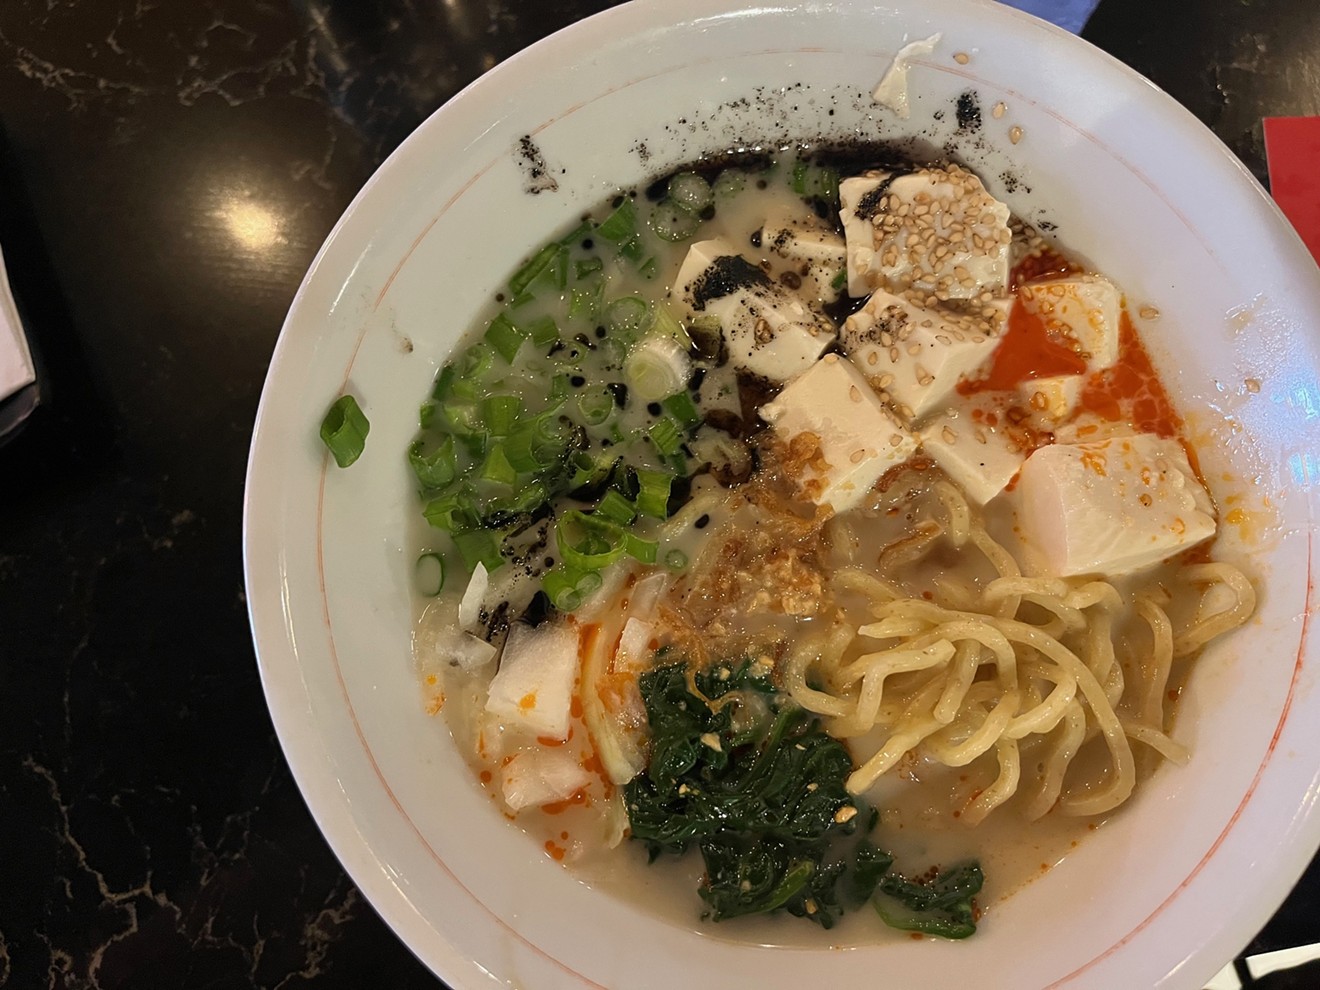 Jinya's spicy creamy vegan ramen includes tofu, spinach, crispy onion and garlic chips in vegetable broth.